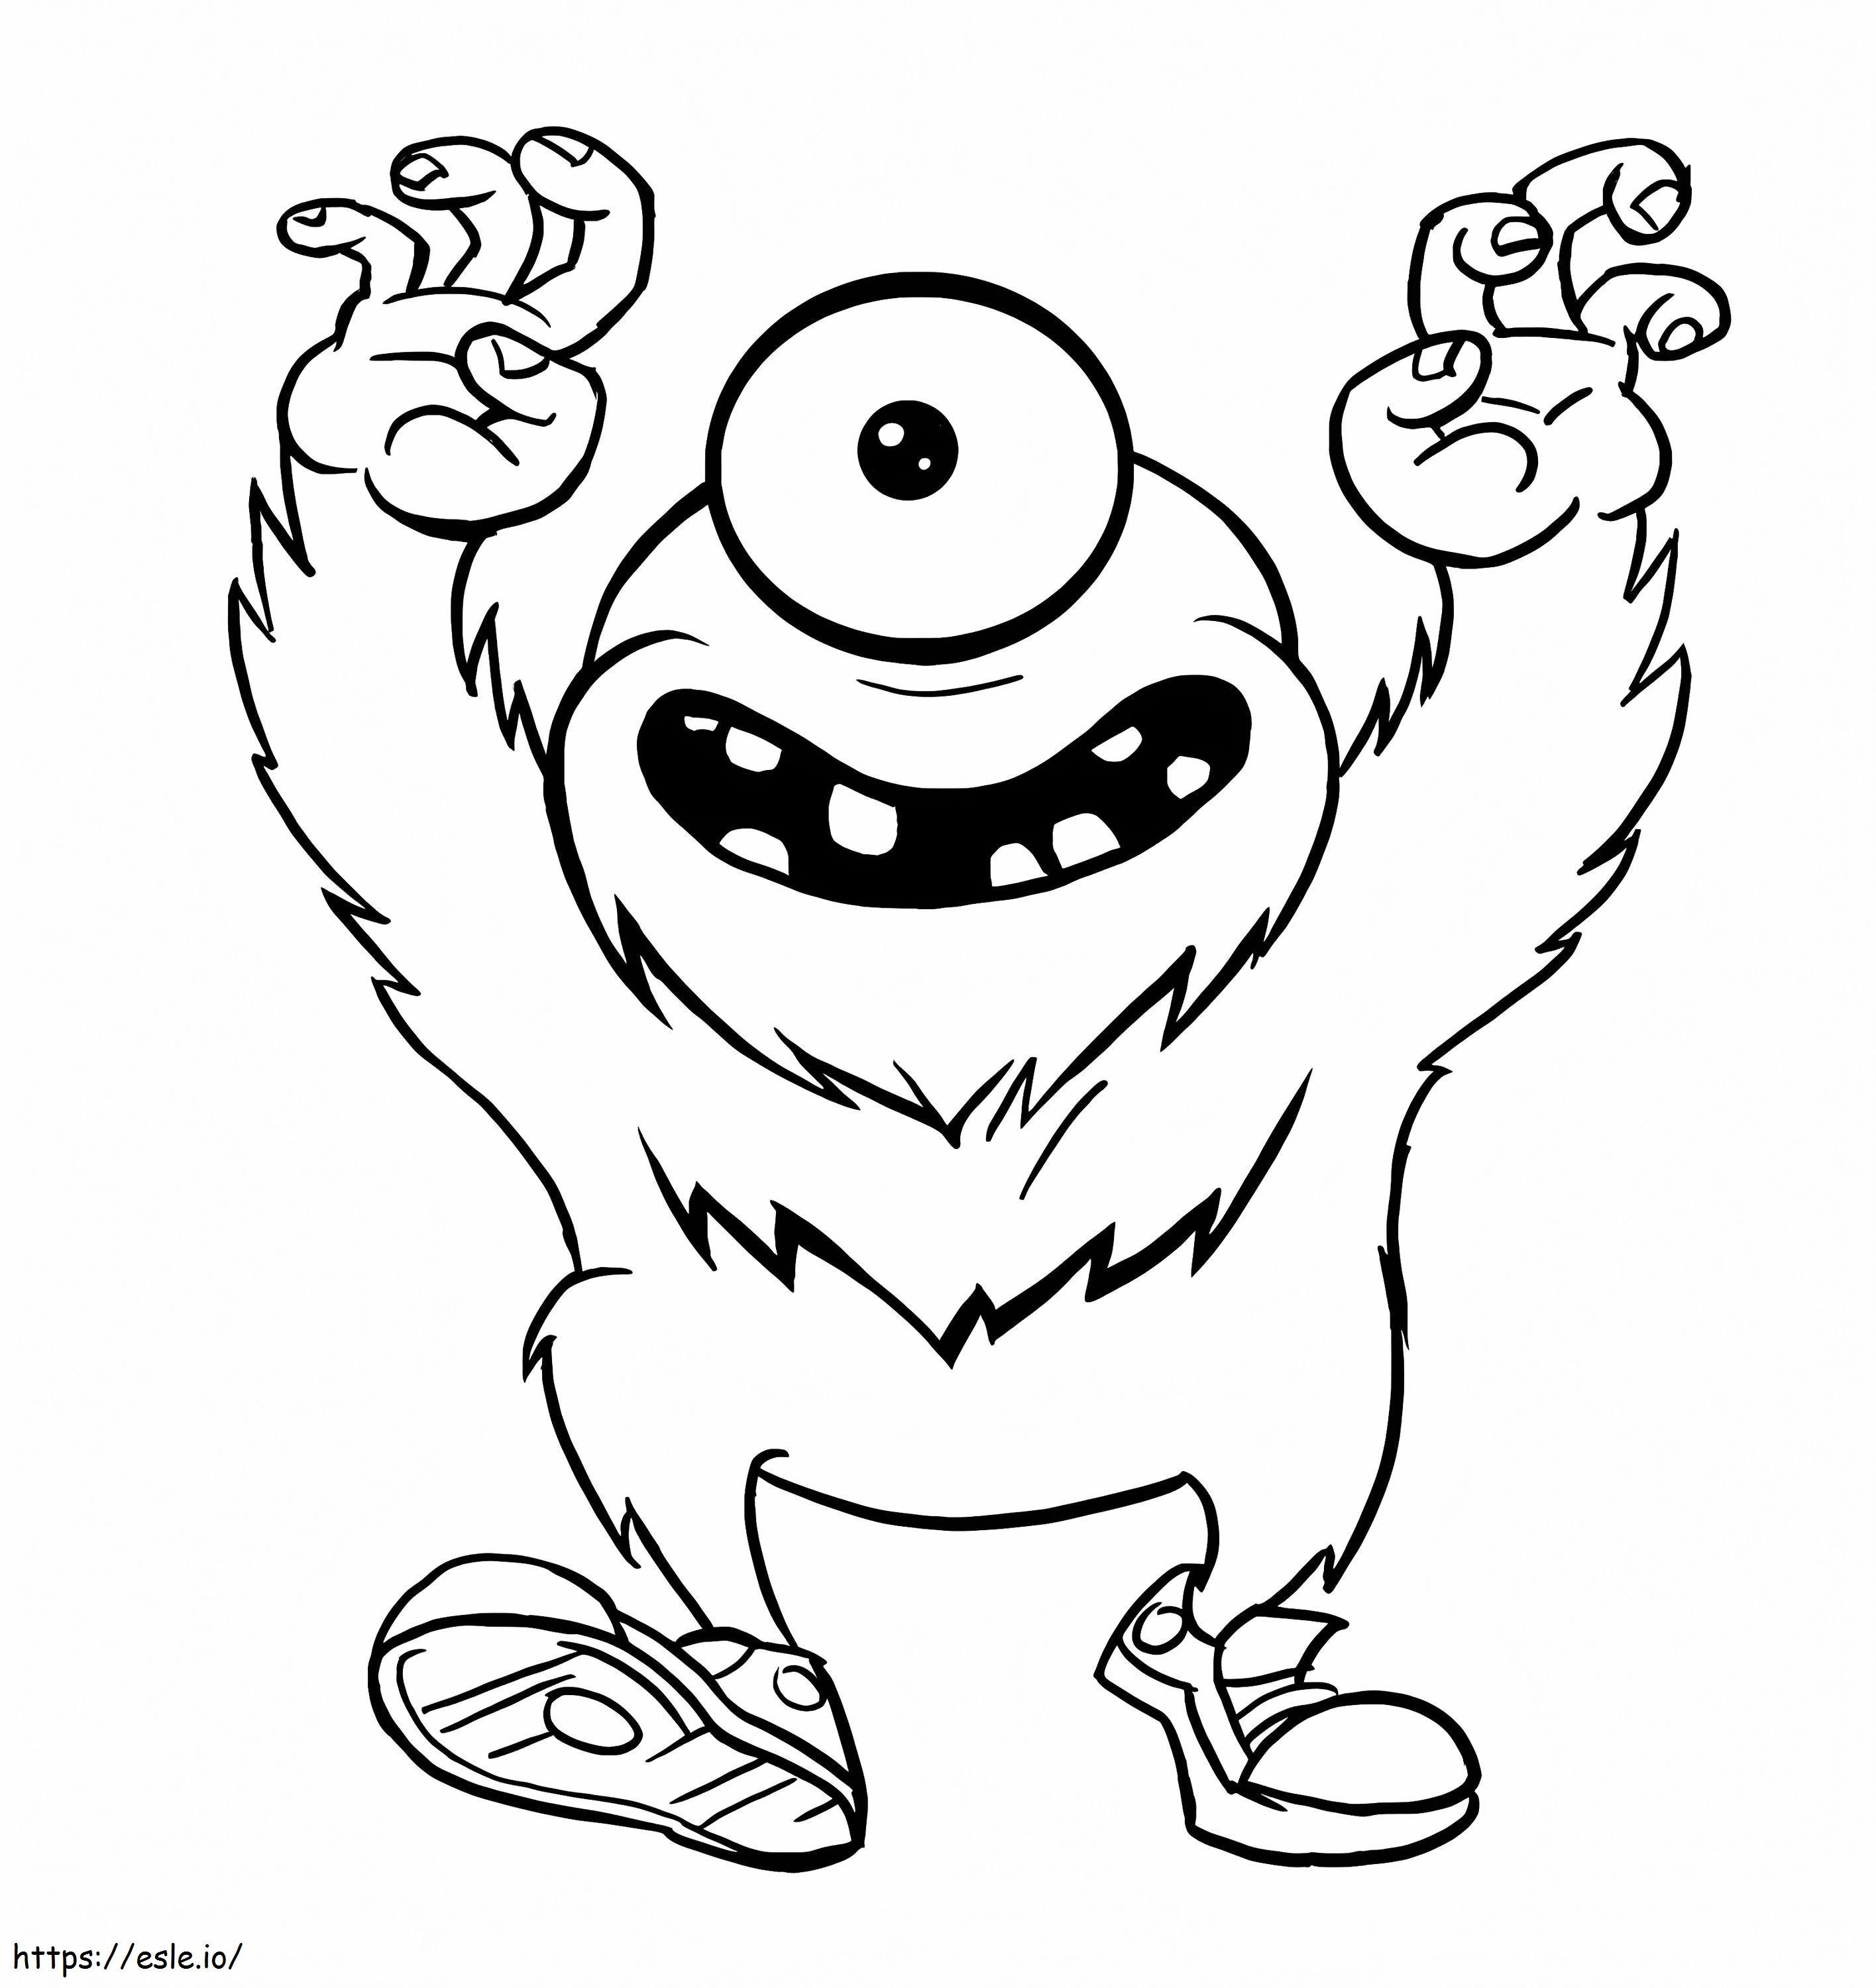 One-Eyed Monster coloring page